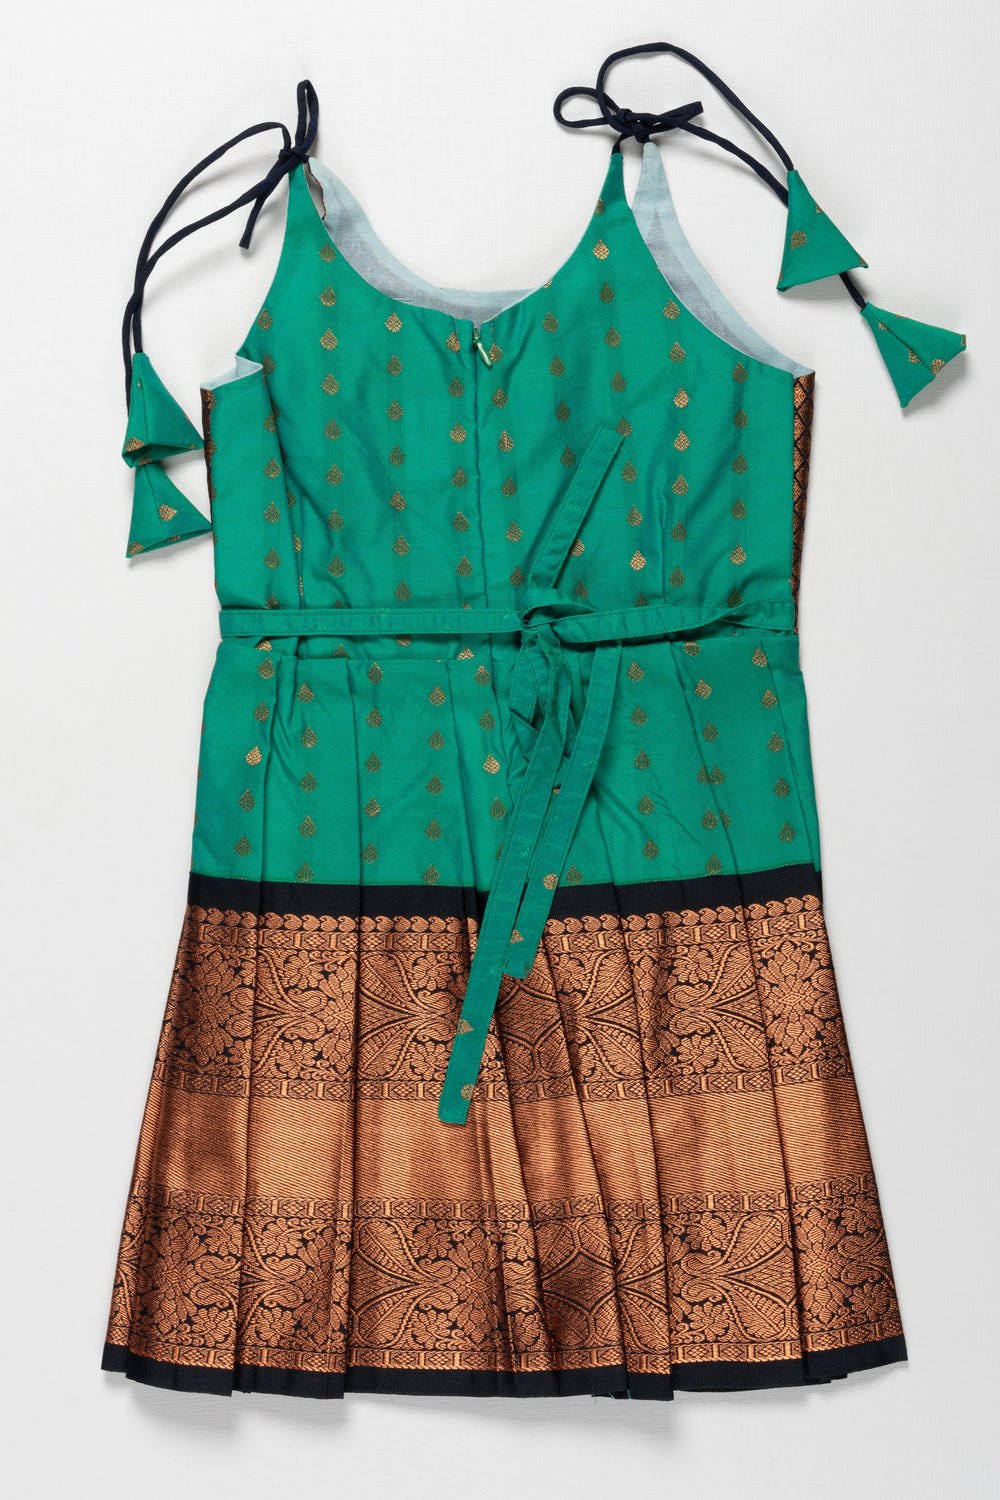 The Nesavu Tie-up Frock Enchanting Green and Bronze Silk Knot-Tie Frock for Ayush Homam and Noolukettu: A Blend of Tradition Nesavu Chic Green and Bronze Silk Dresses for Girls | Elegant Party Wear with KnotTie Detail | The Nesavu